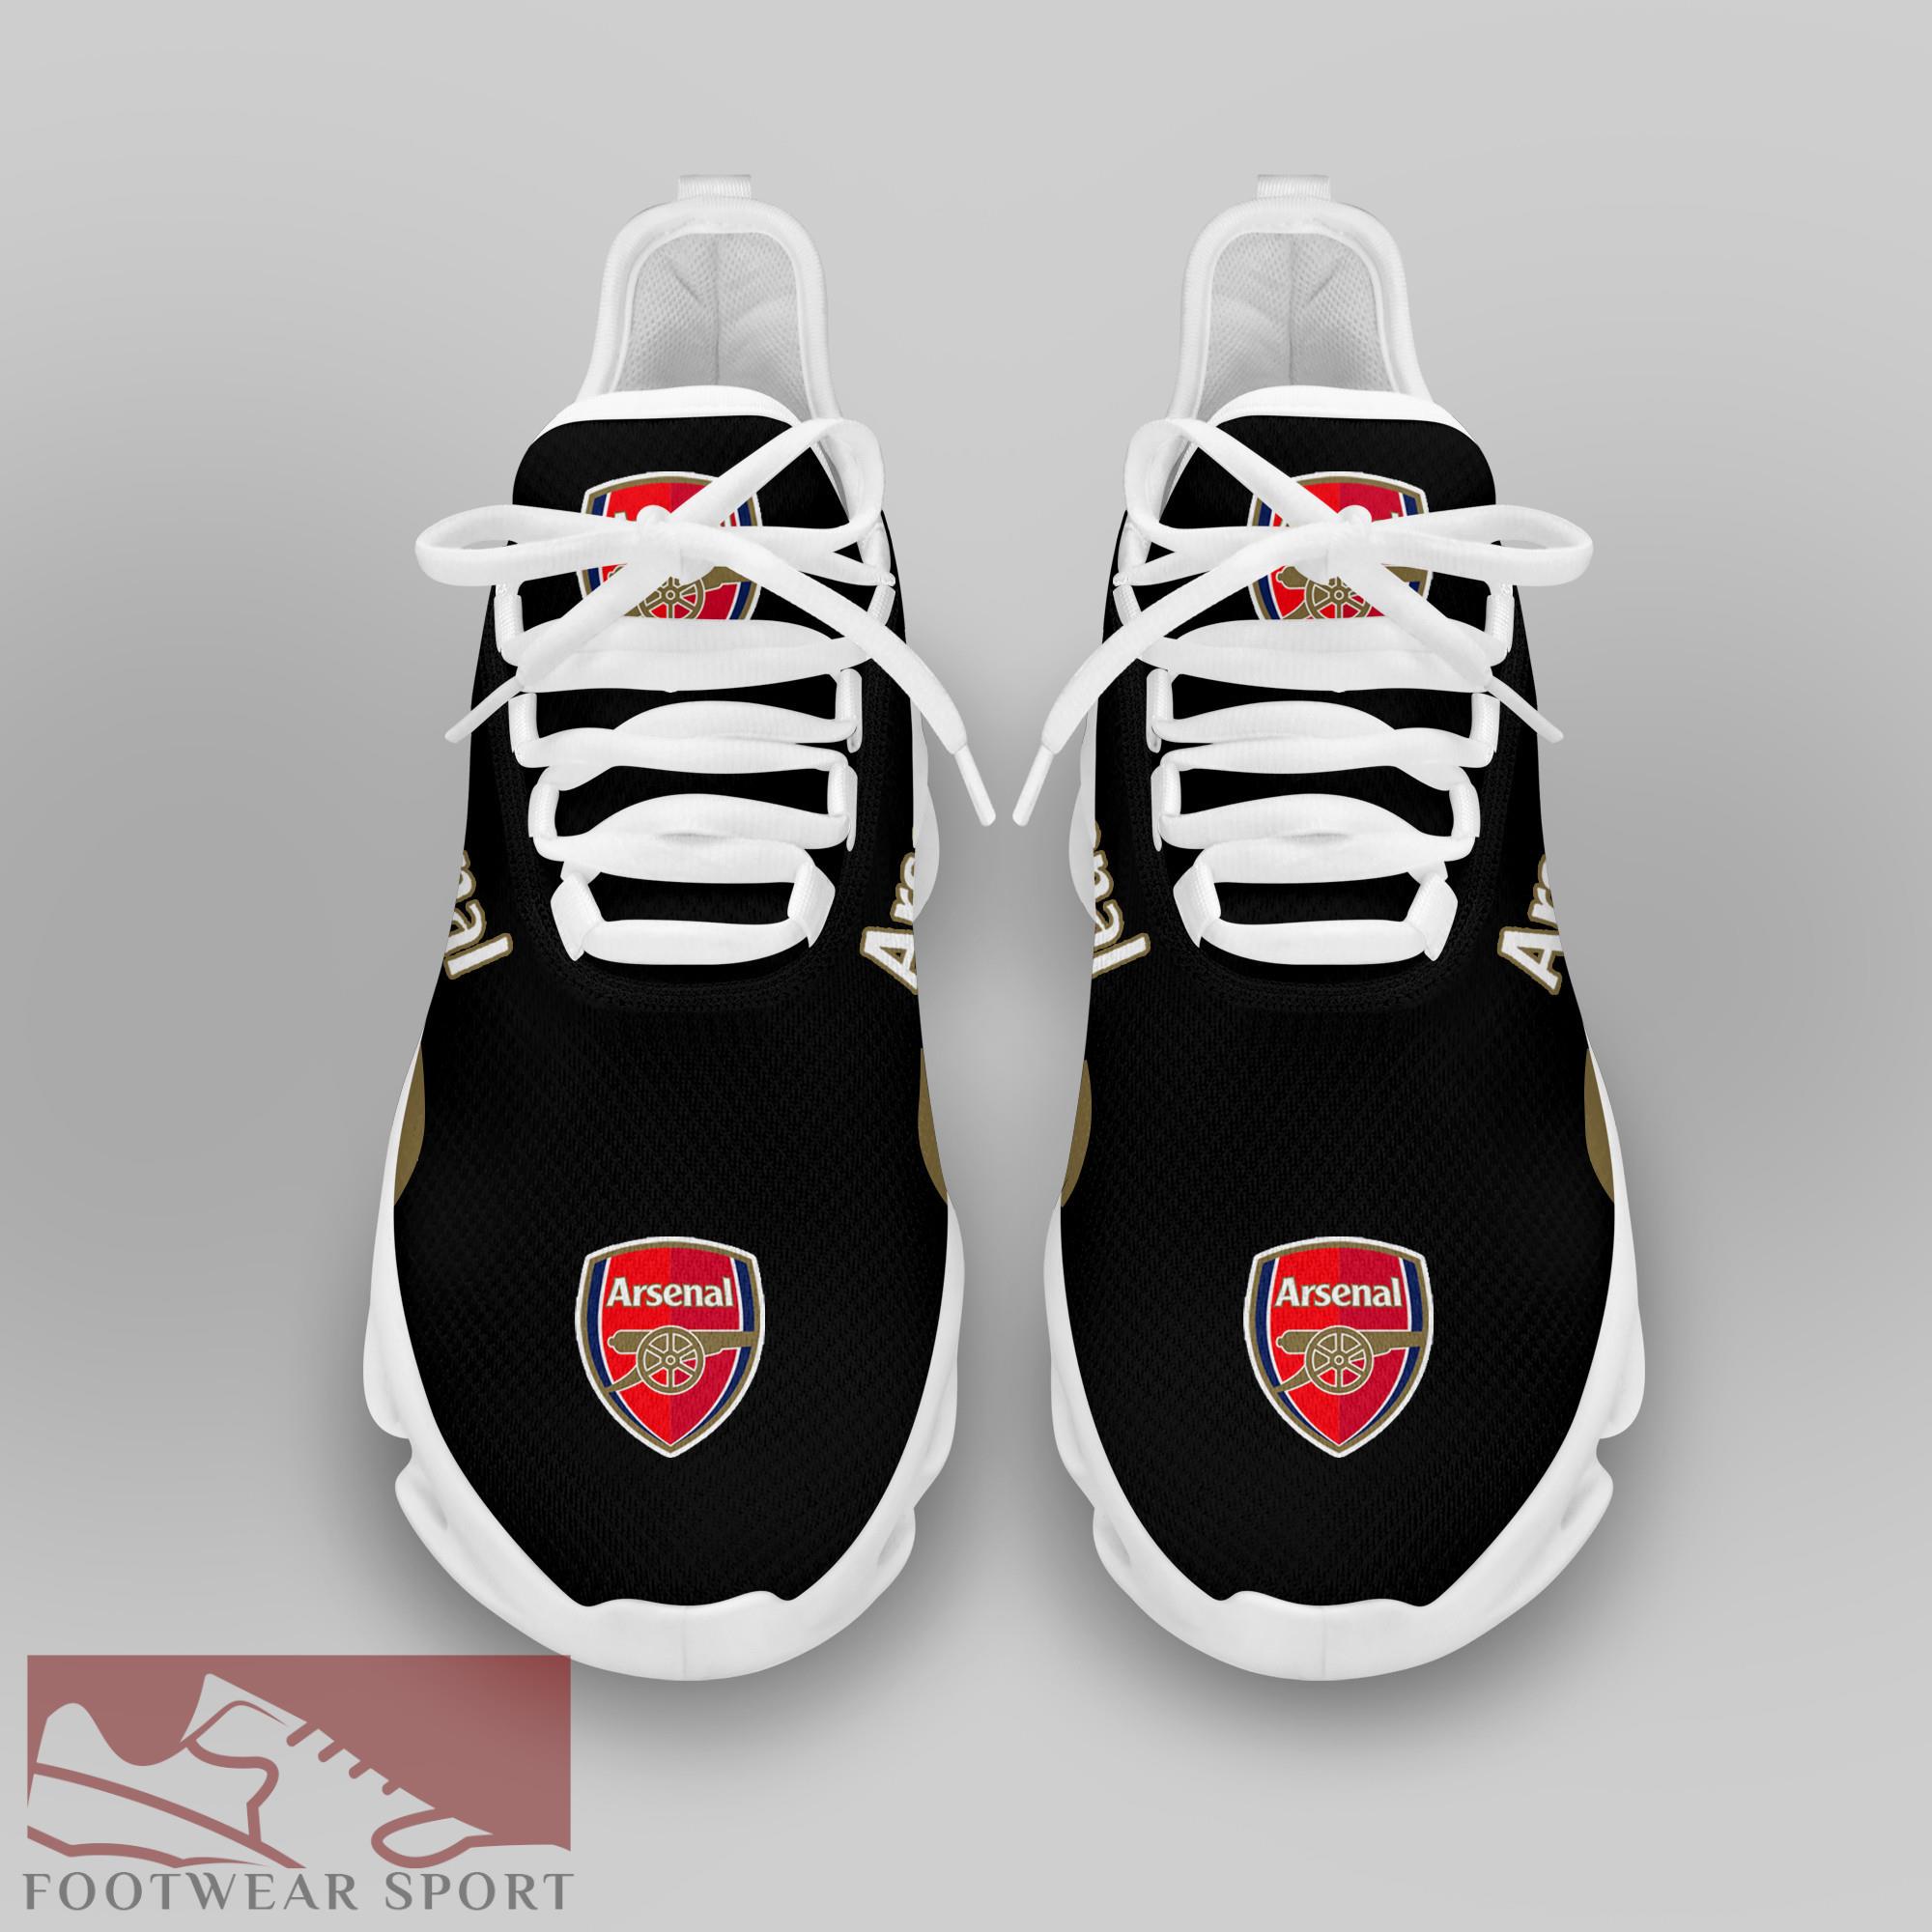 Arsenal Fans EPL Chunky Sneakers Trendsetting Max Soul Shoes For Men And Women - Arsenal Chunky Sneakers White Black Max Soul Shoes For Men And Women Photo 3